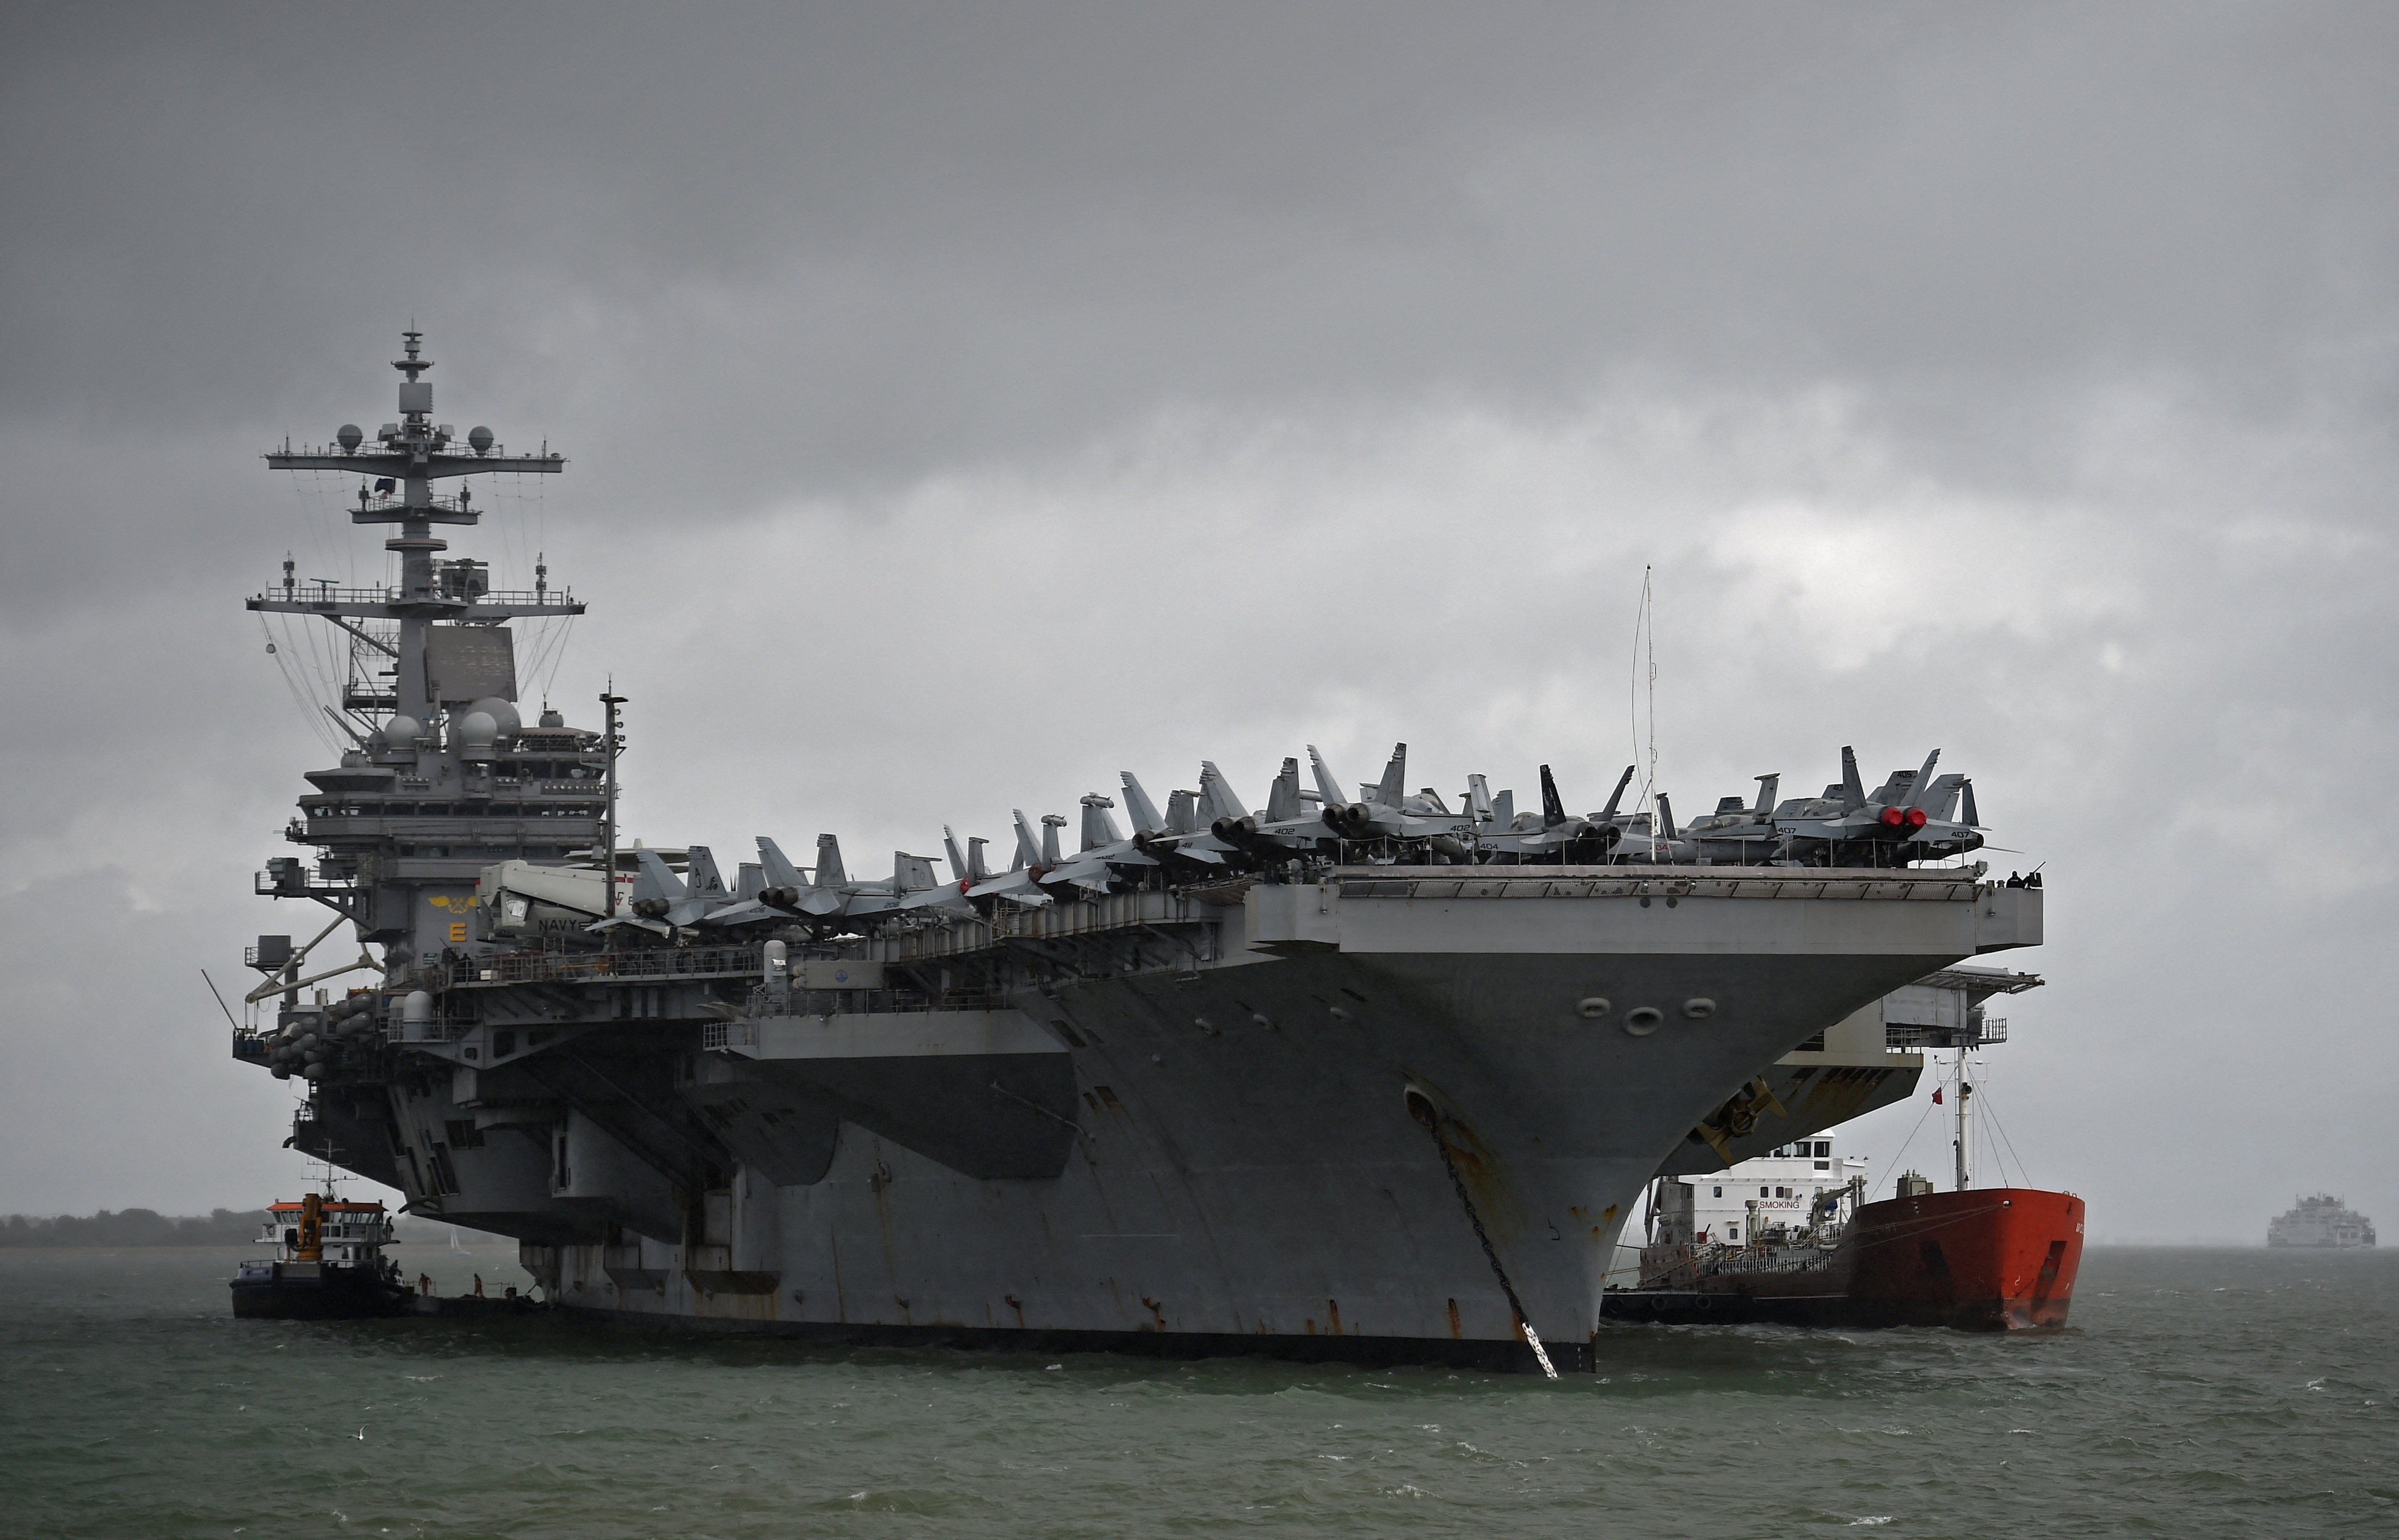 The USS George H.W. Bush aircraft carrier is seen anchored off Stokes Bay in the Solent